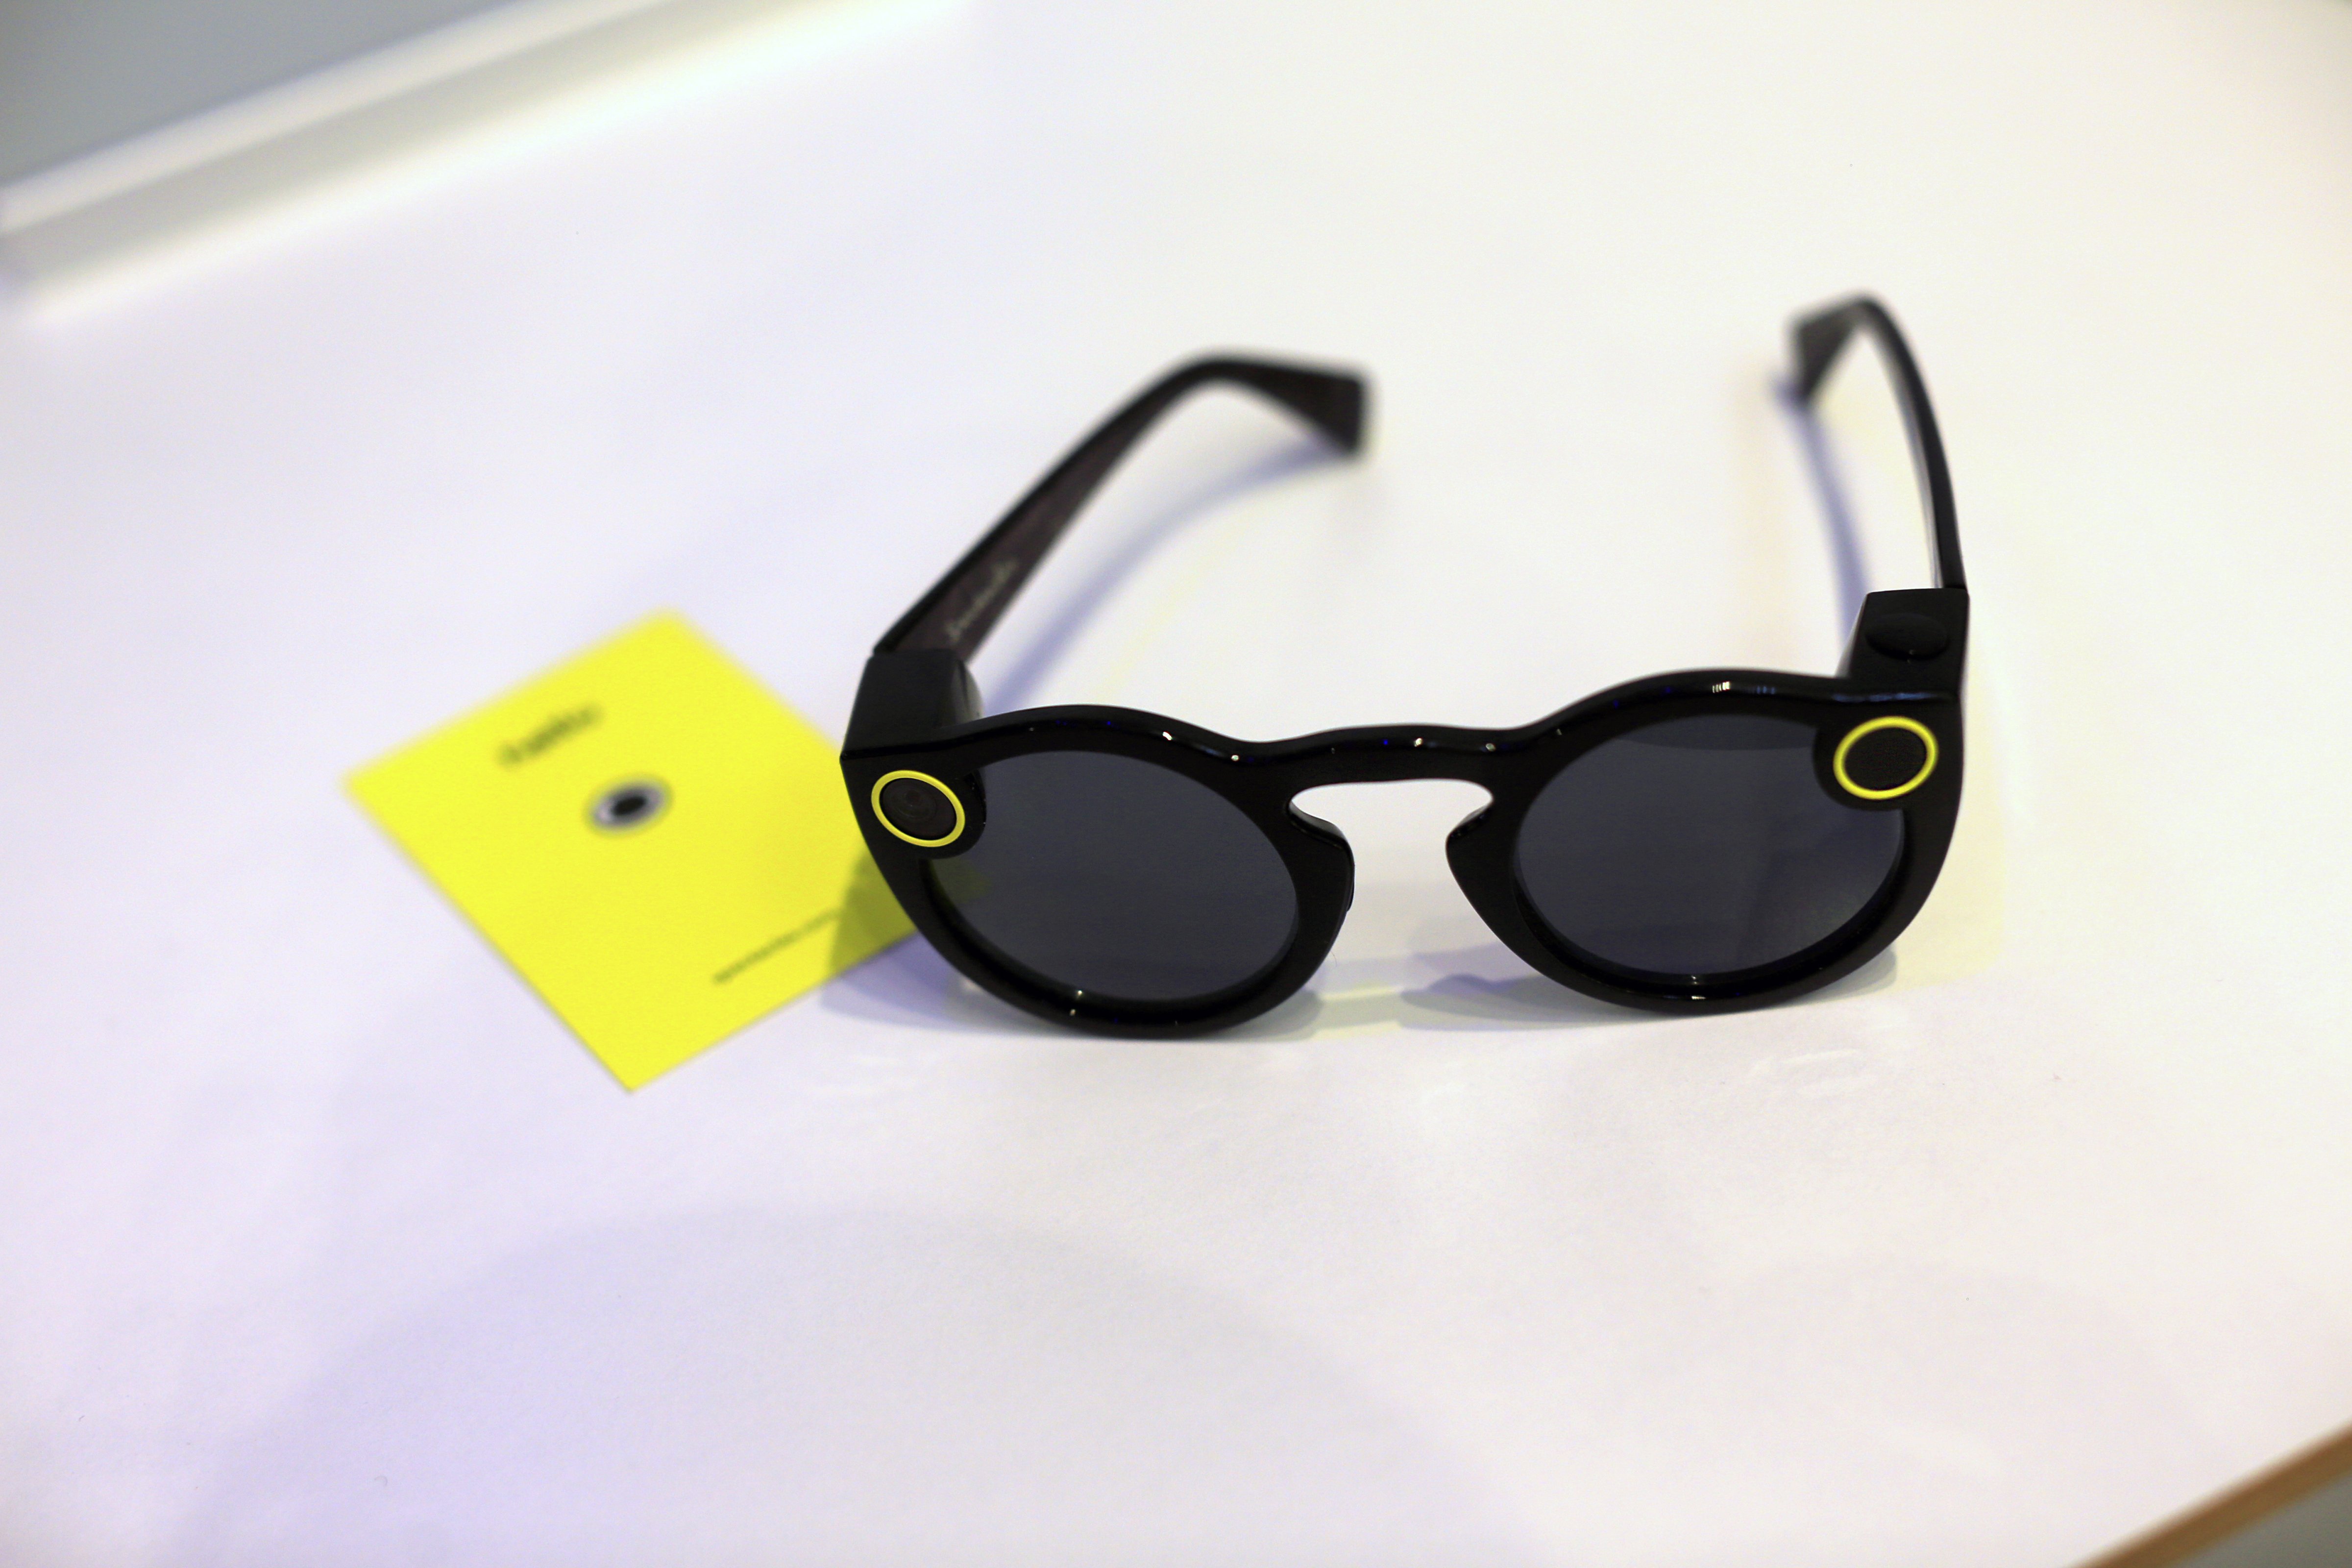 Snapchat Spectacles by Snap Inc. are displayed inside the company's pop-up store in New York on Dec. 5, 2016. (Bloomberg—Getty Images)